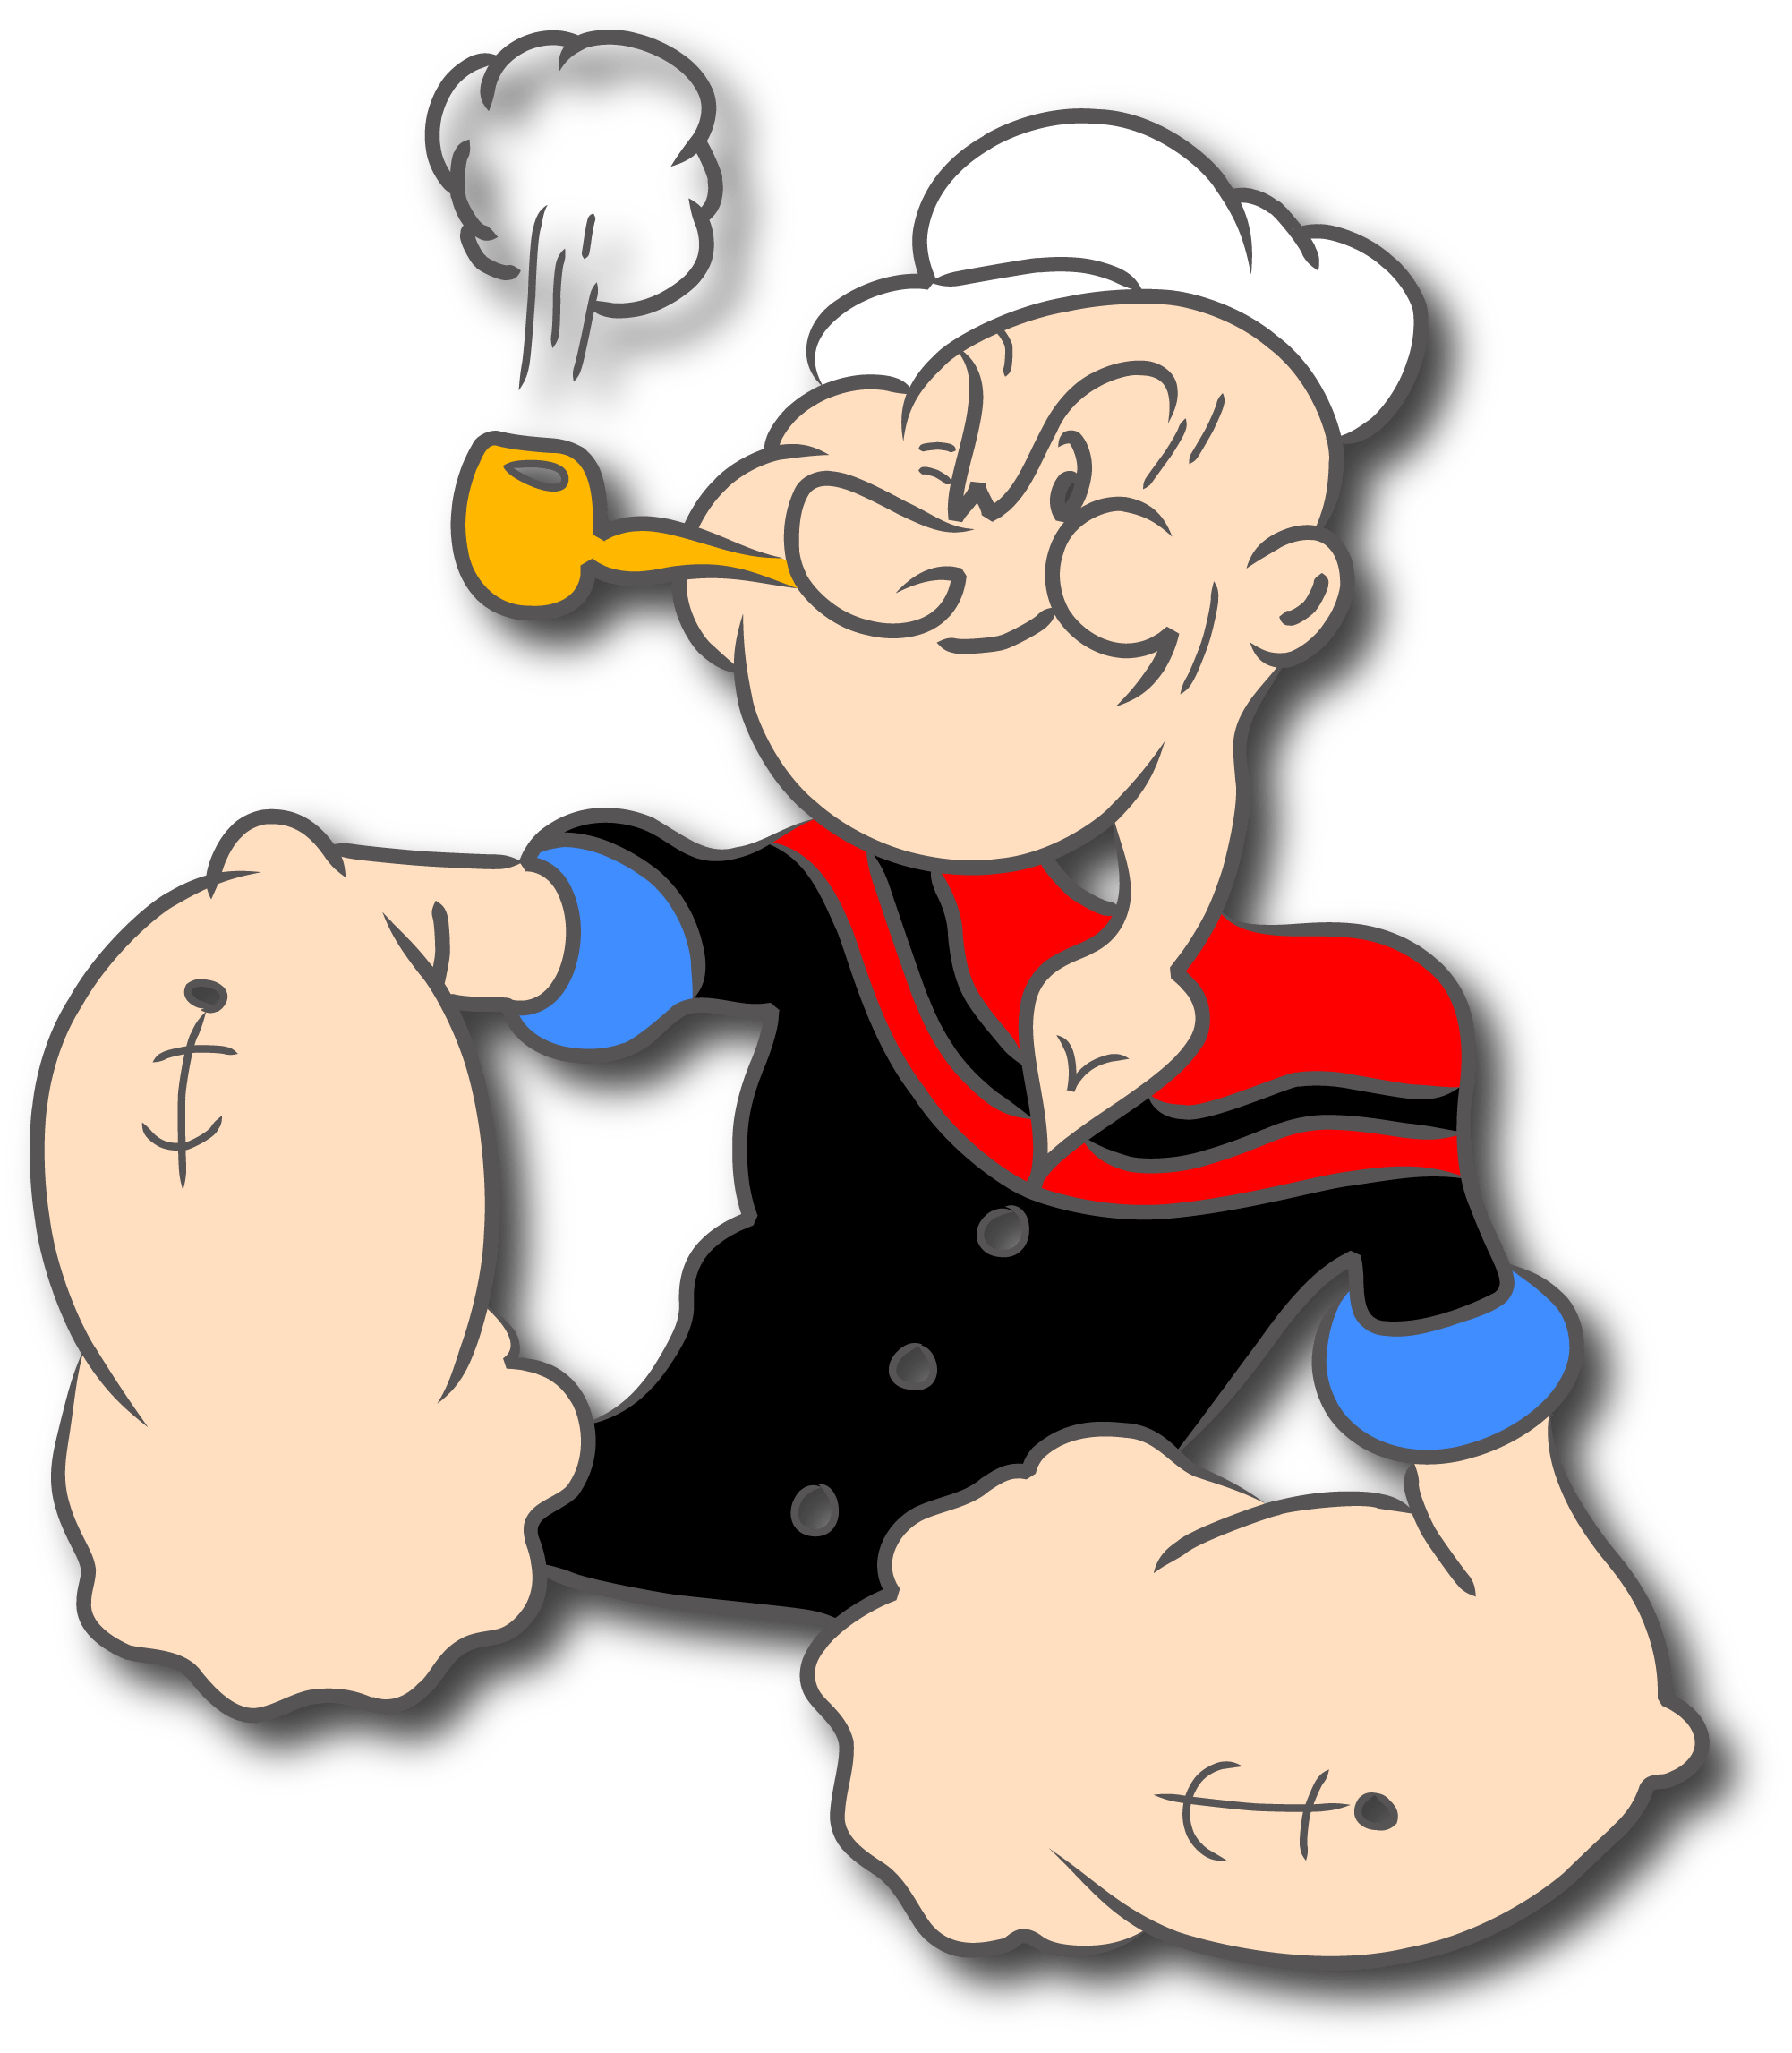 popeye cartoon wallpaper for android cartoons wallpapers